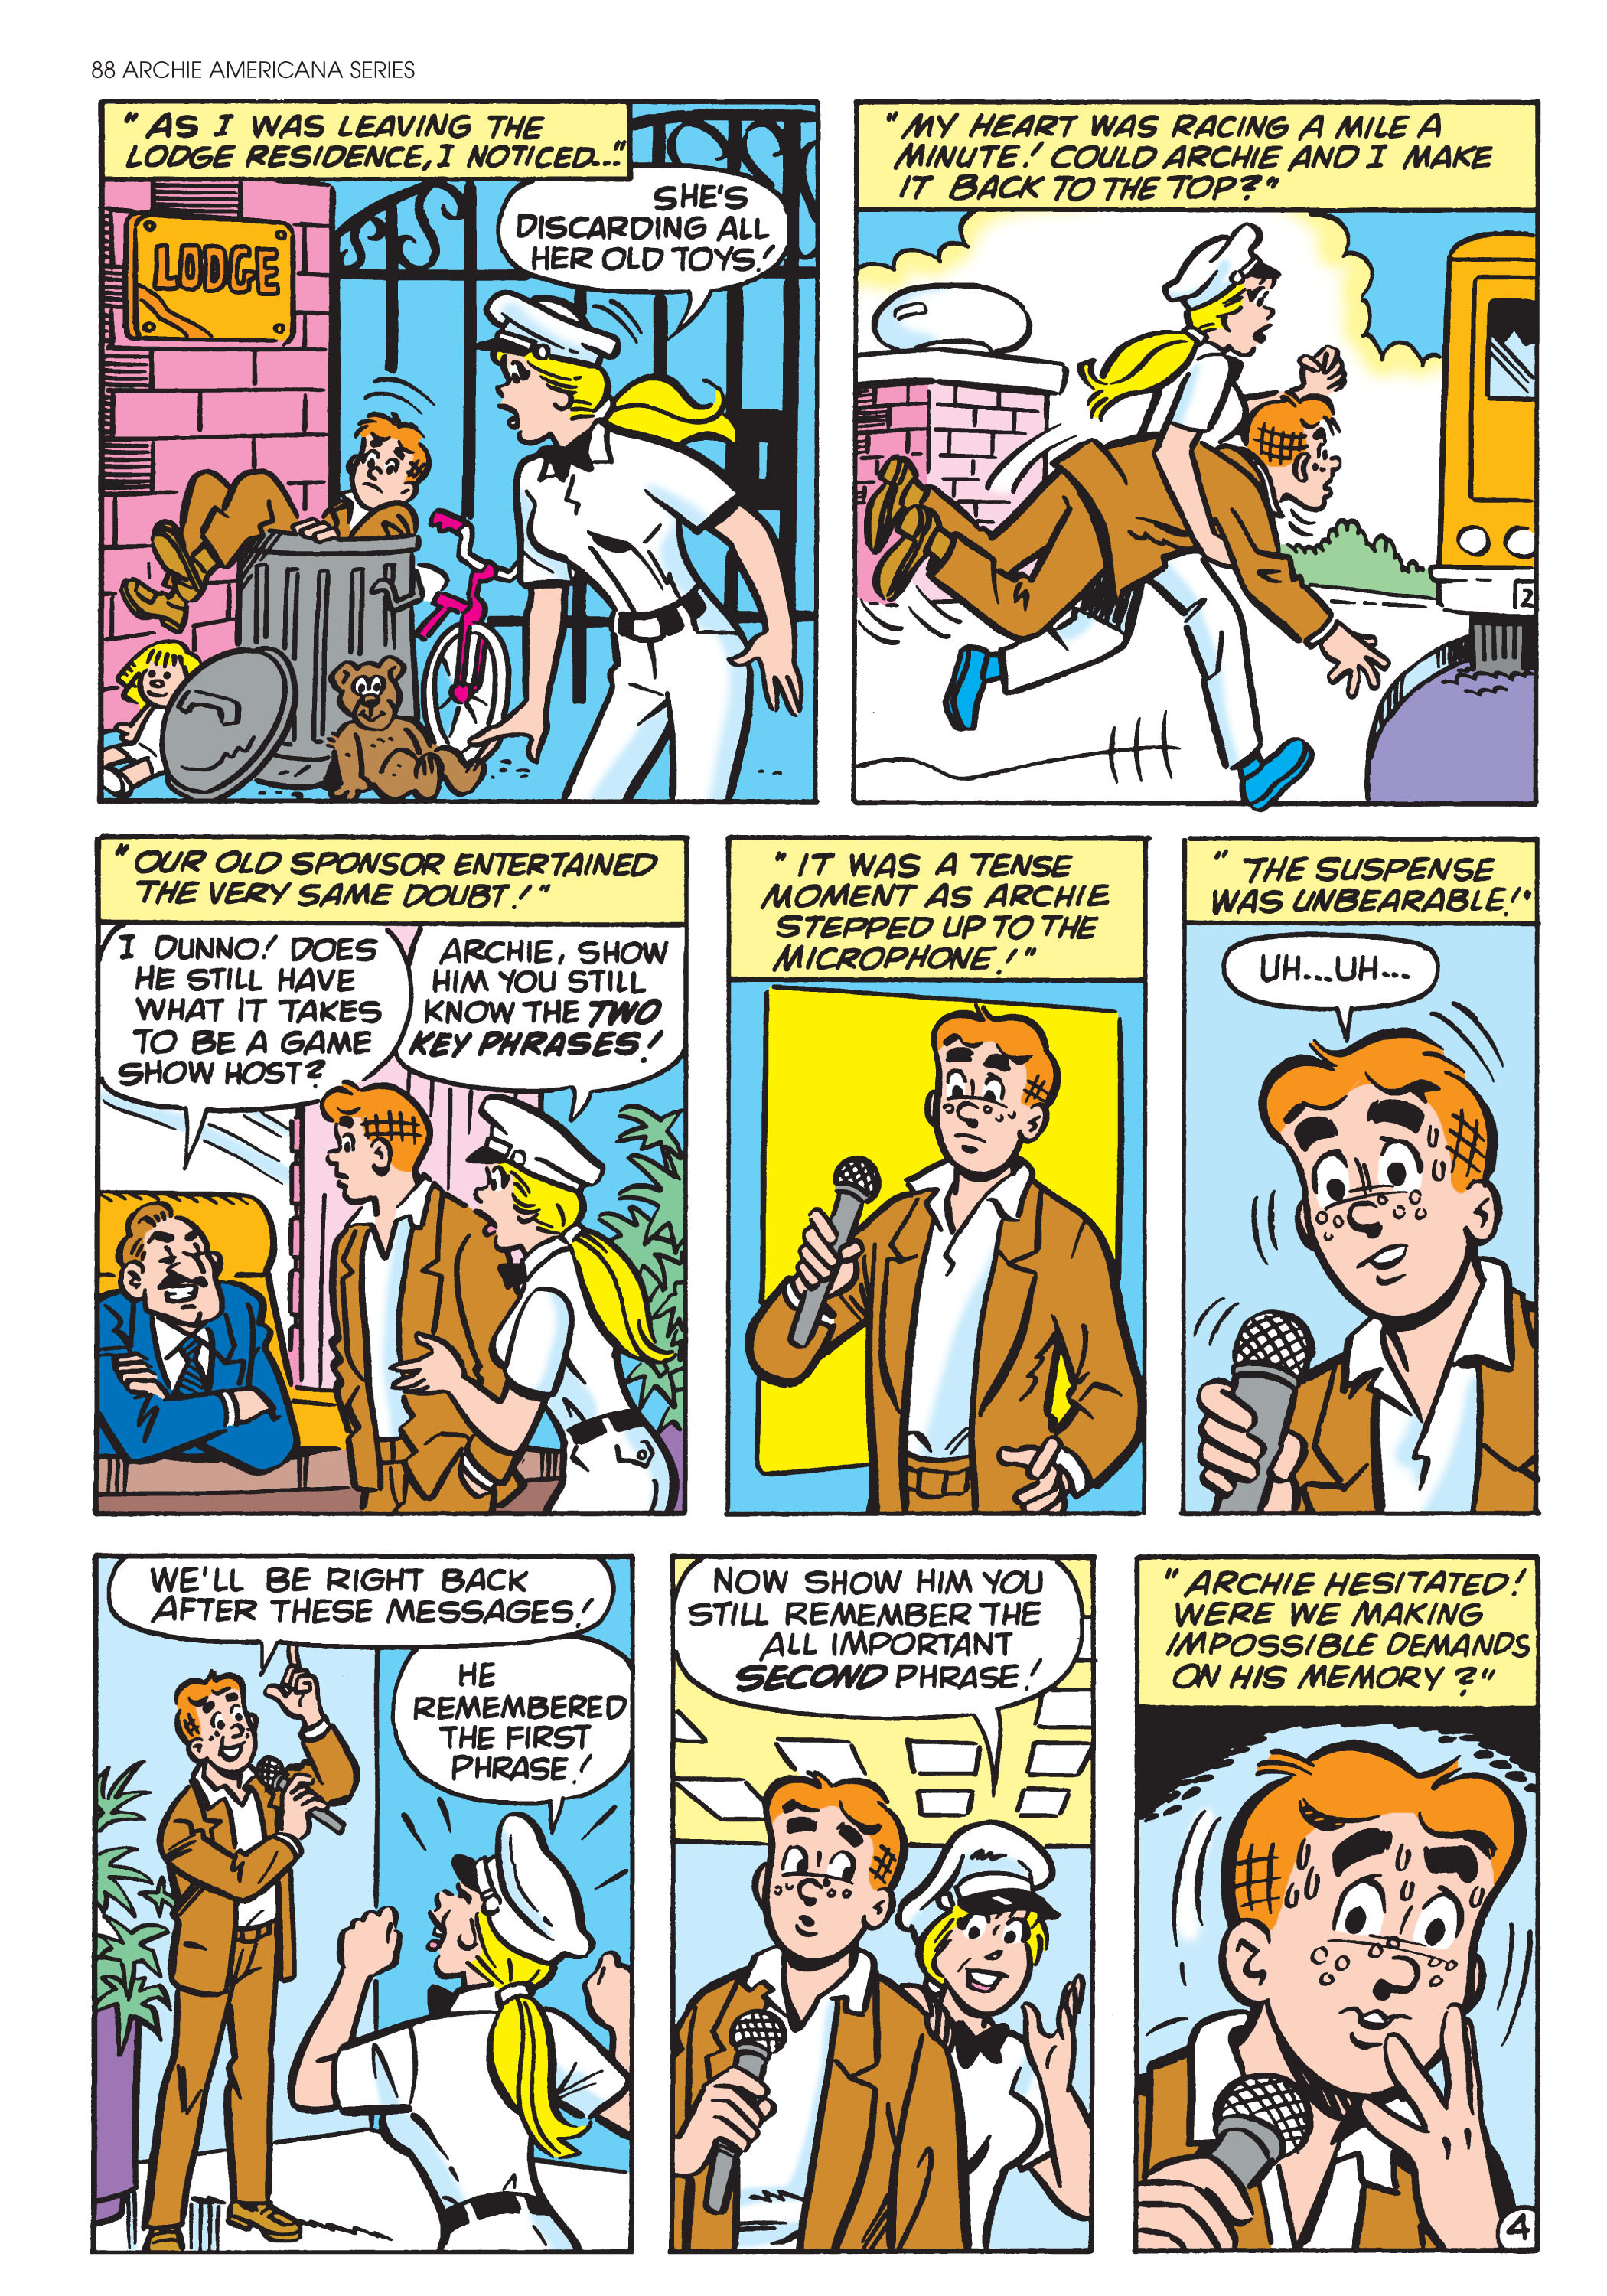 Read online Archie Americana Series comic -  Issue # TPB 5 - 90